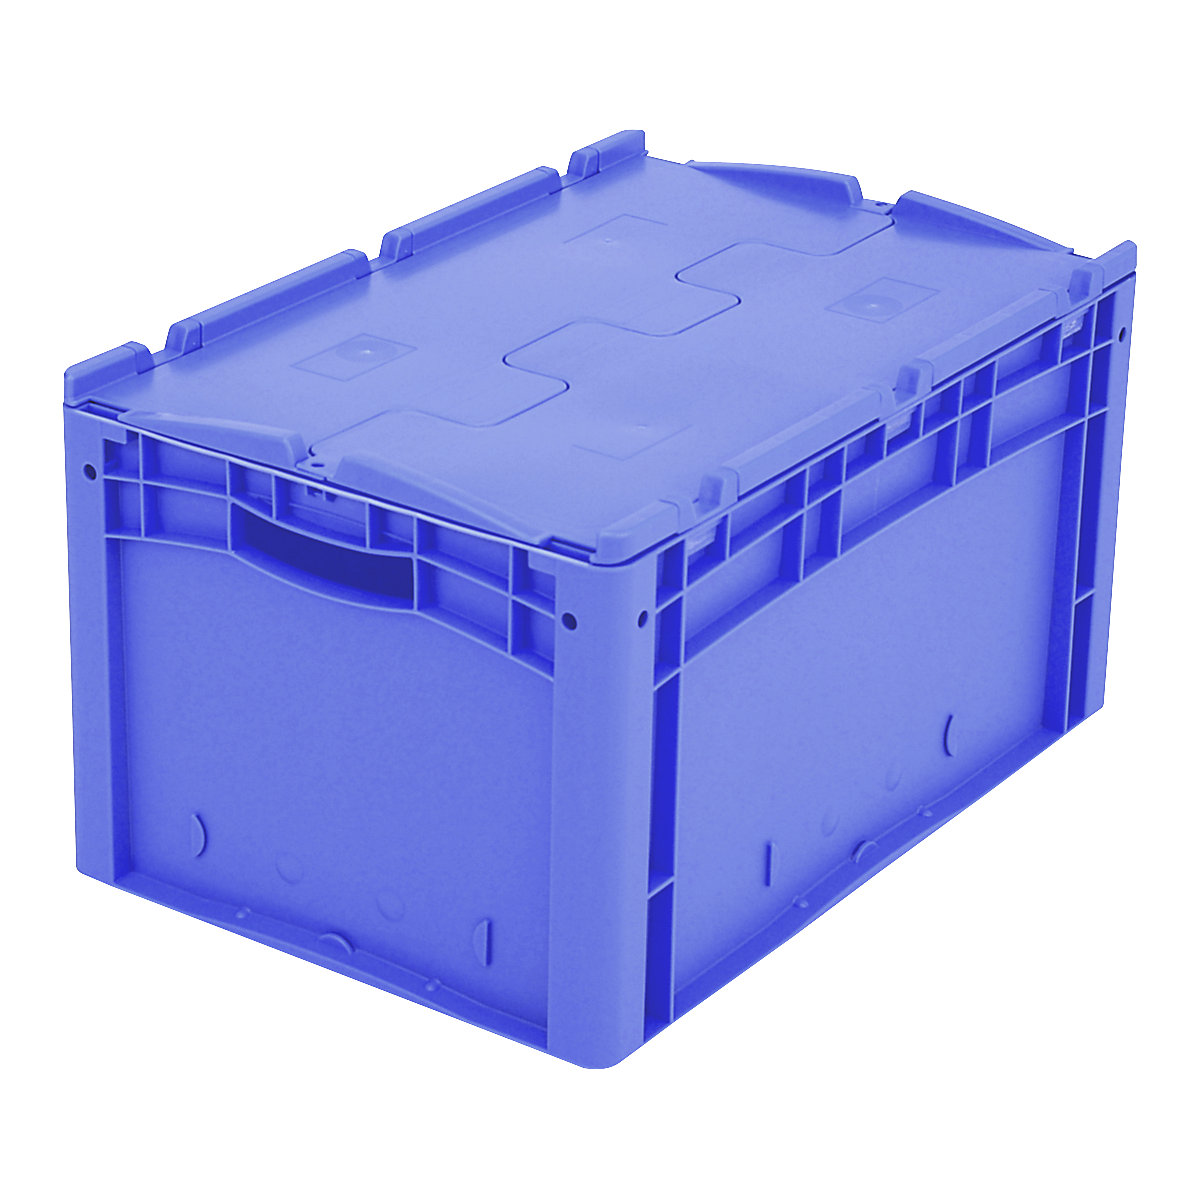 XL Euro stacking container – BITO, with 2-section hinged lid, LxWxH 600 x 400 x 338 mm-17